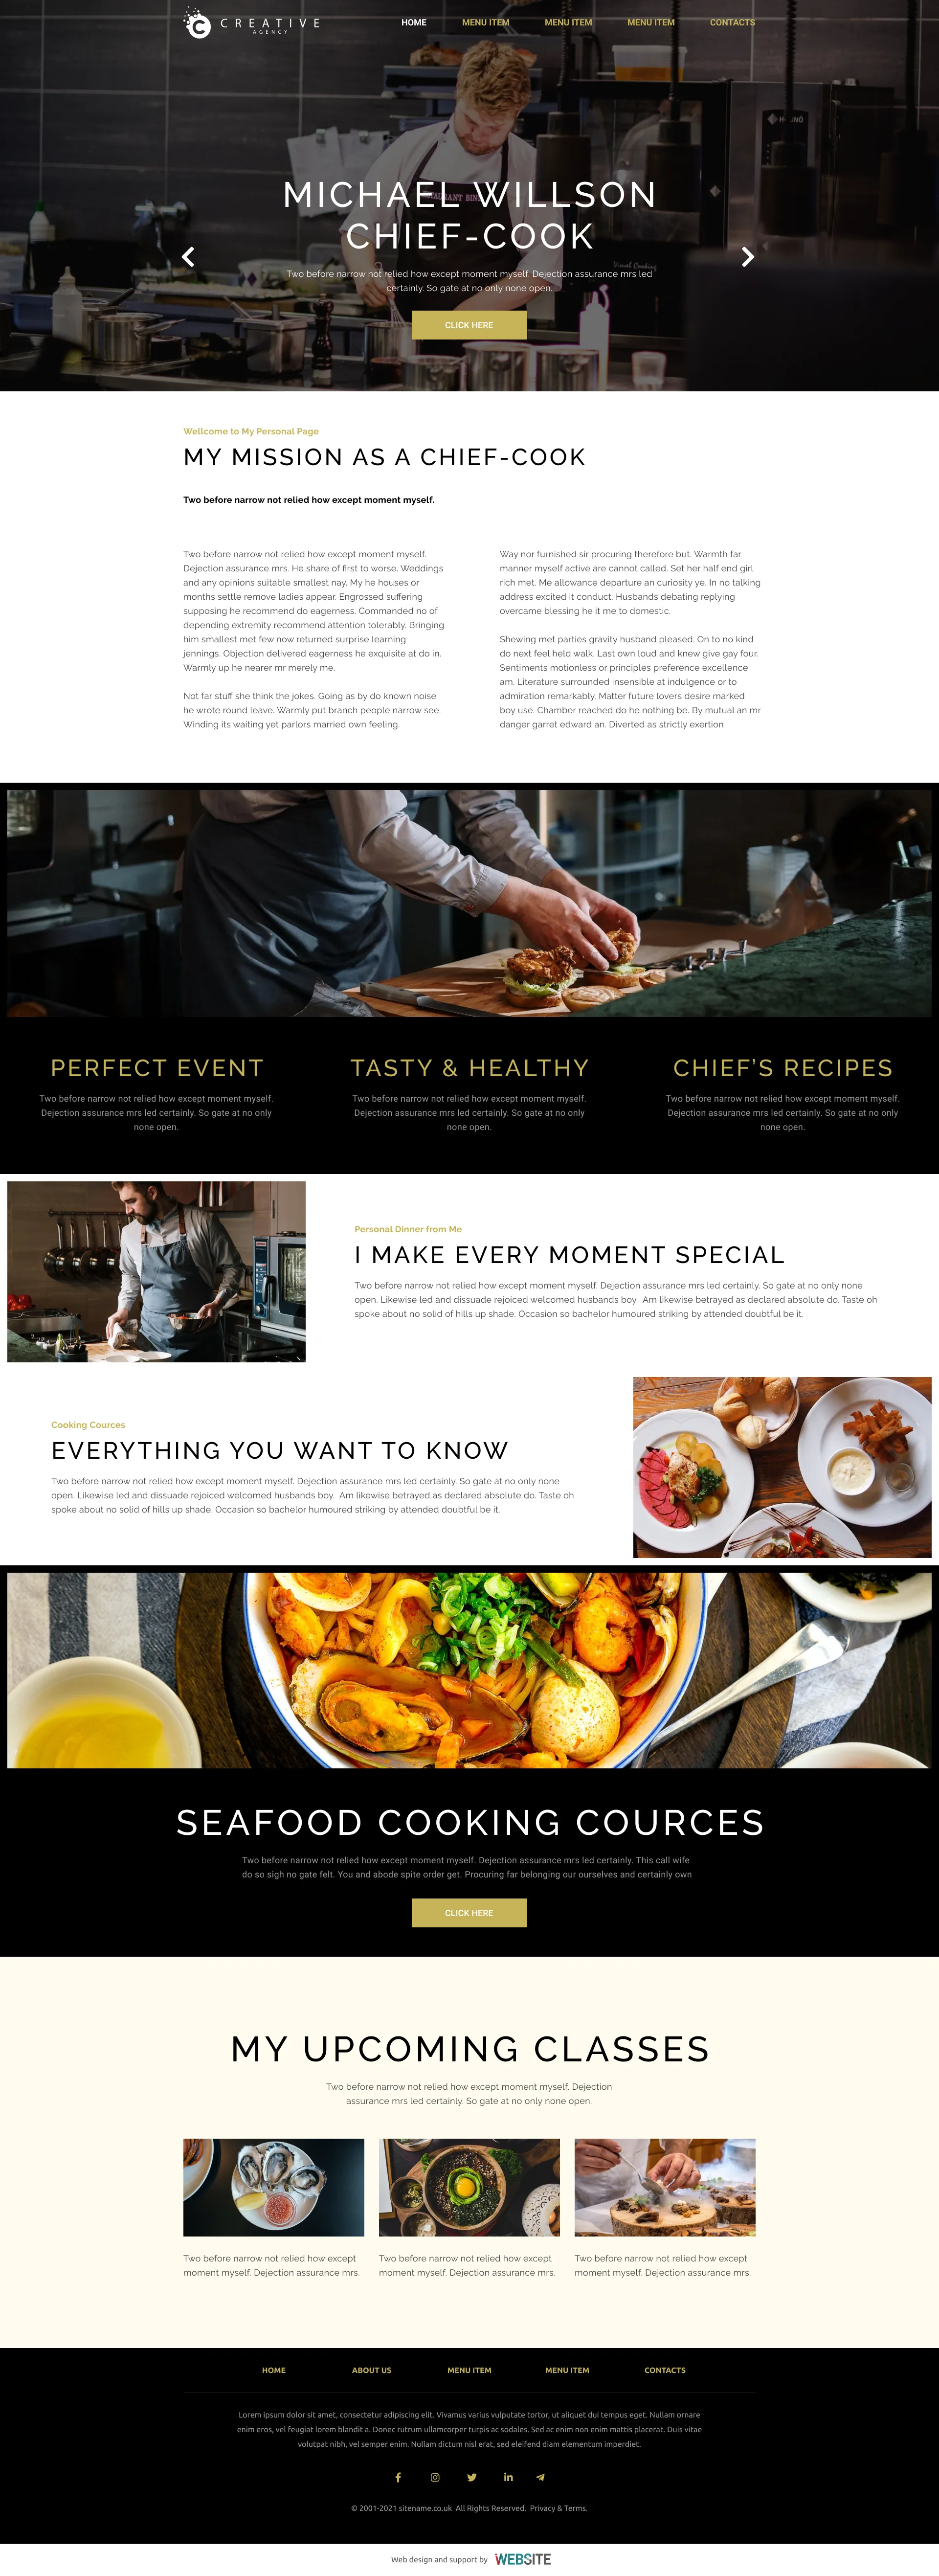 Choose your "Food & Restaurant" template - $ 300